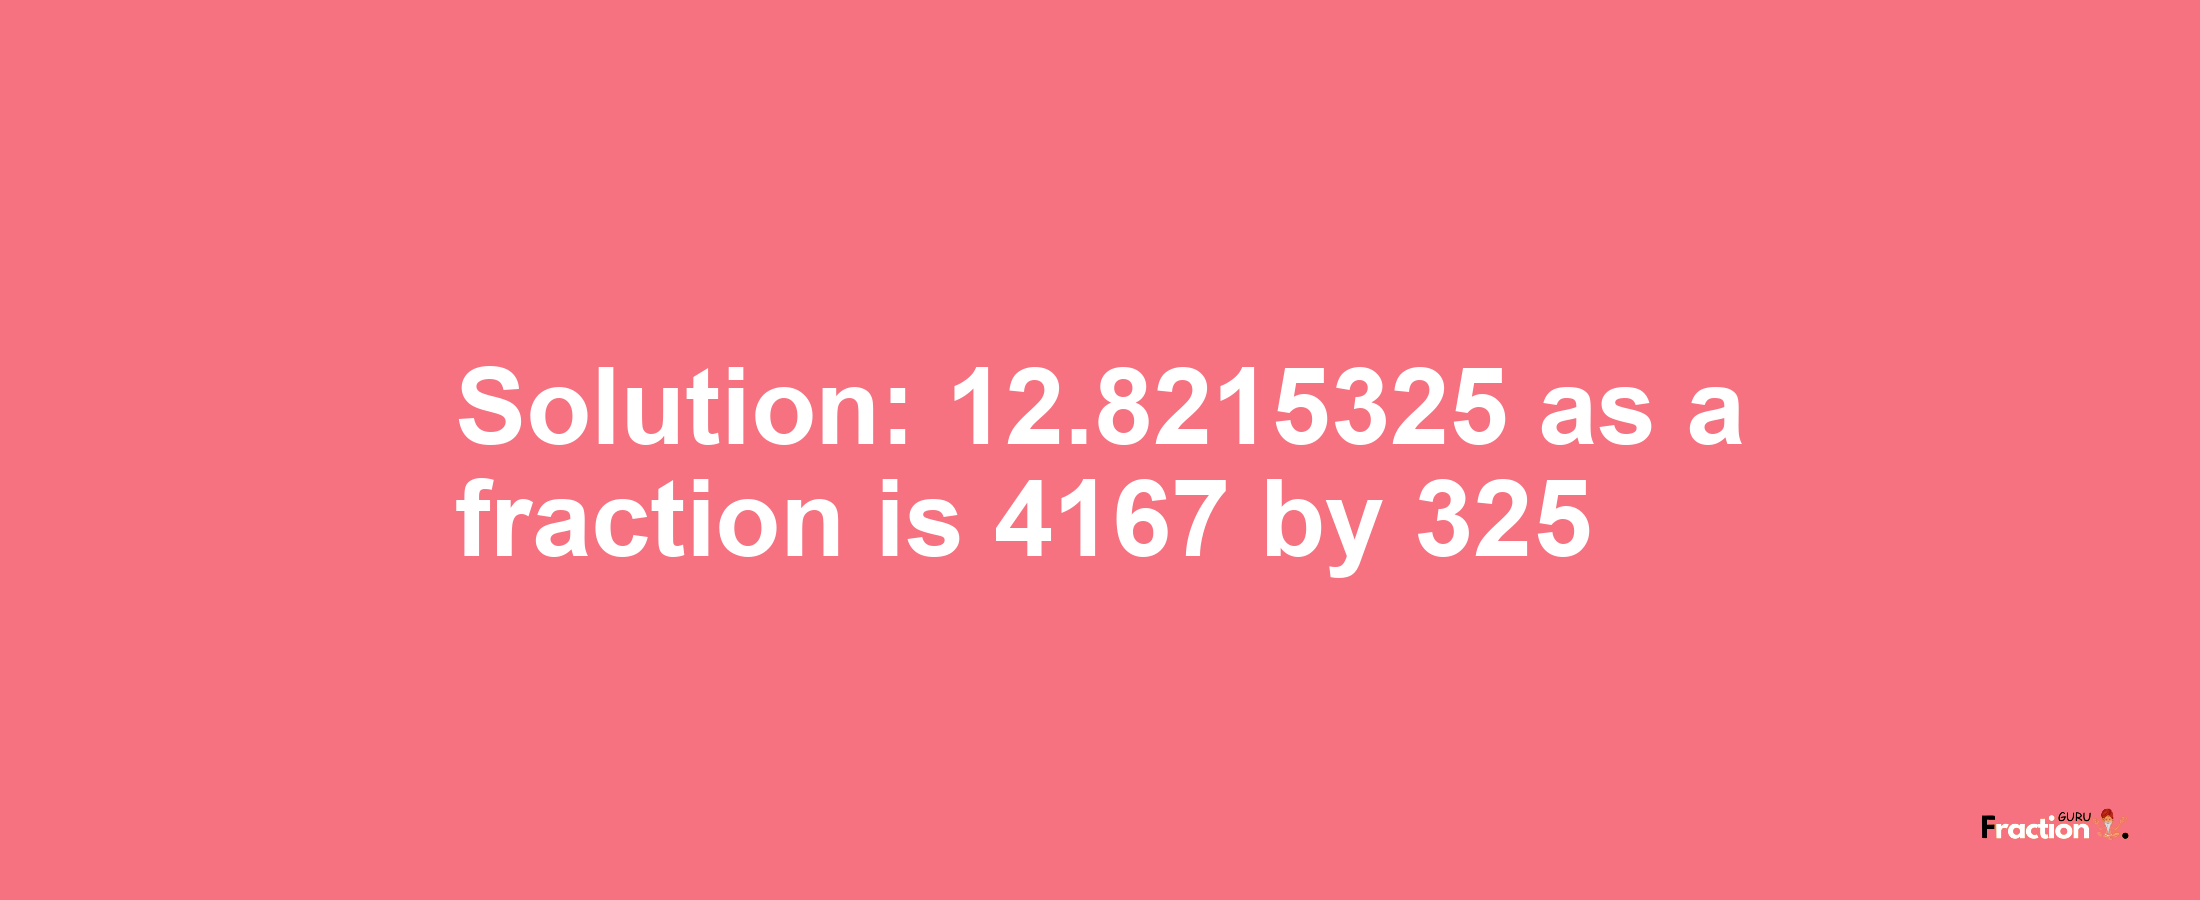 Solution:12.8215325 as a fraction is 4167/325